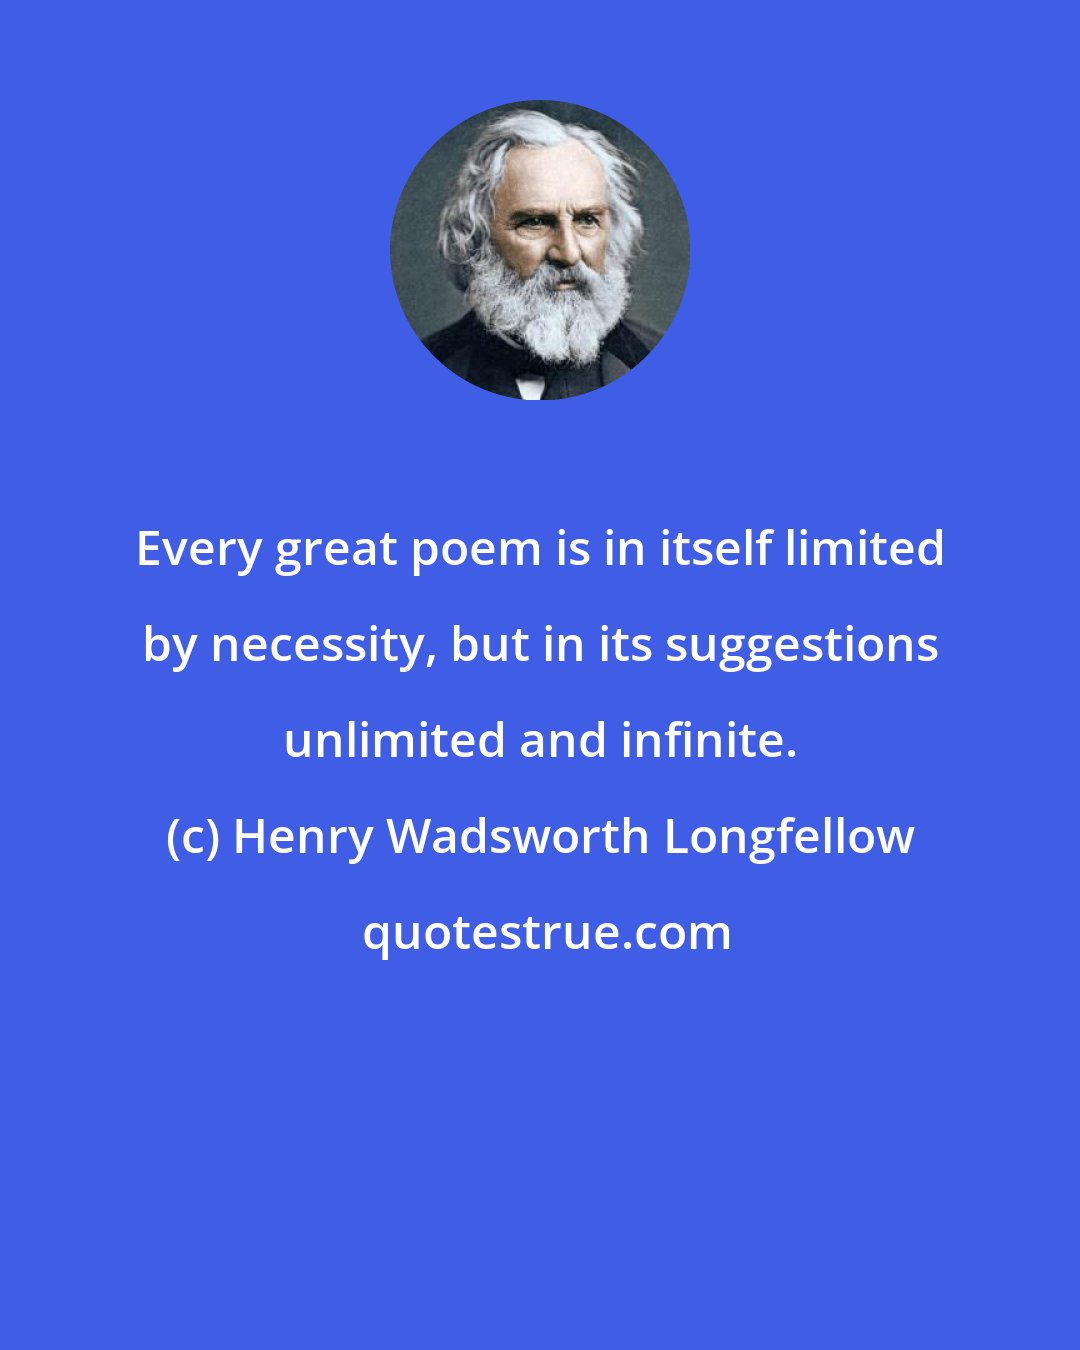 Henry Wadsworth Longfellow: Every great poem is in itself limited by necessity, but in its suggestions unlimited and infinite.